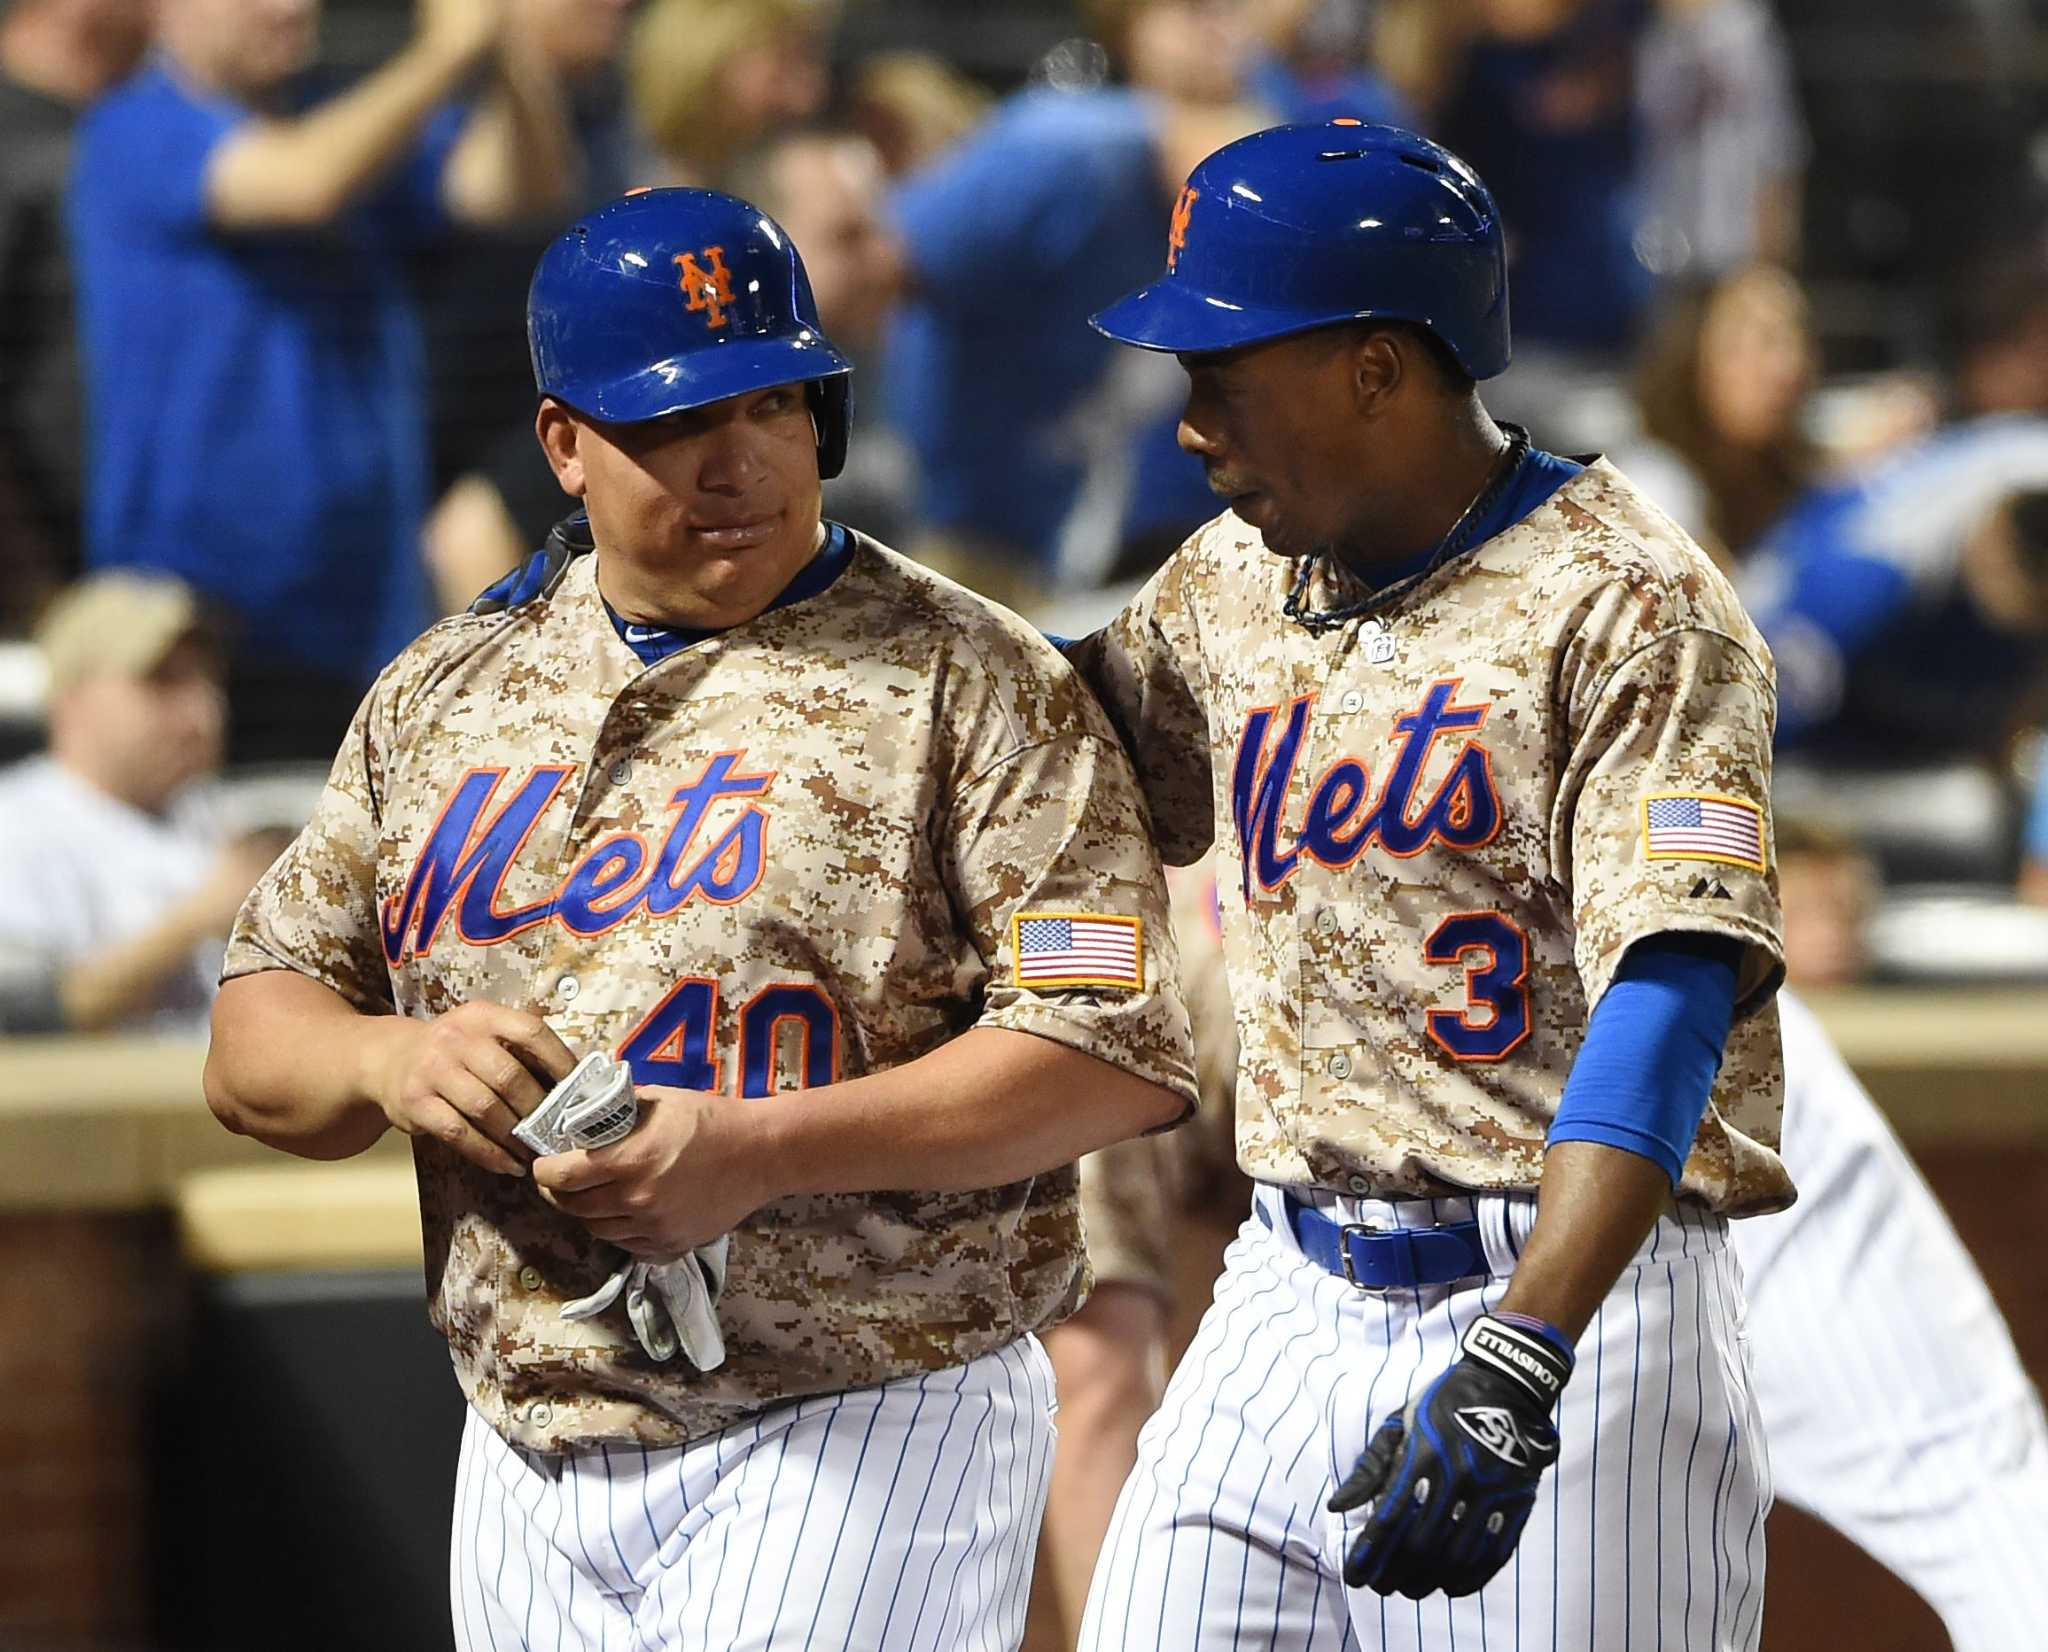 Bartolo Colon throws 8 shutout innings as Mets beat Phillies